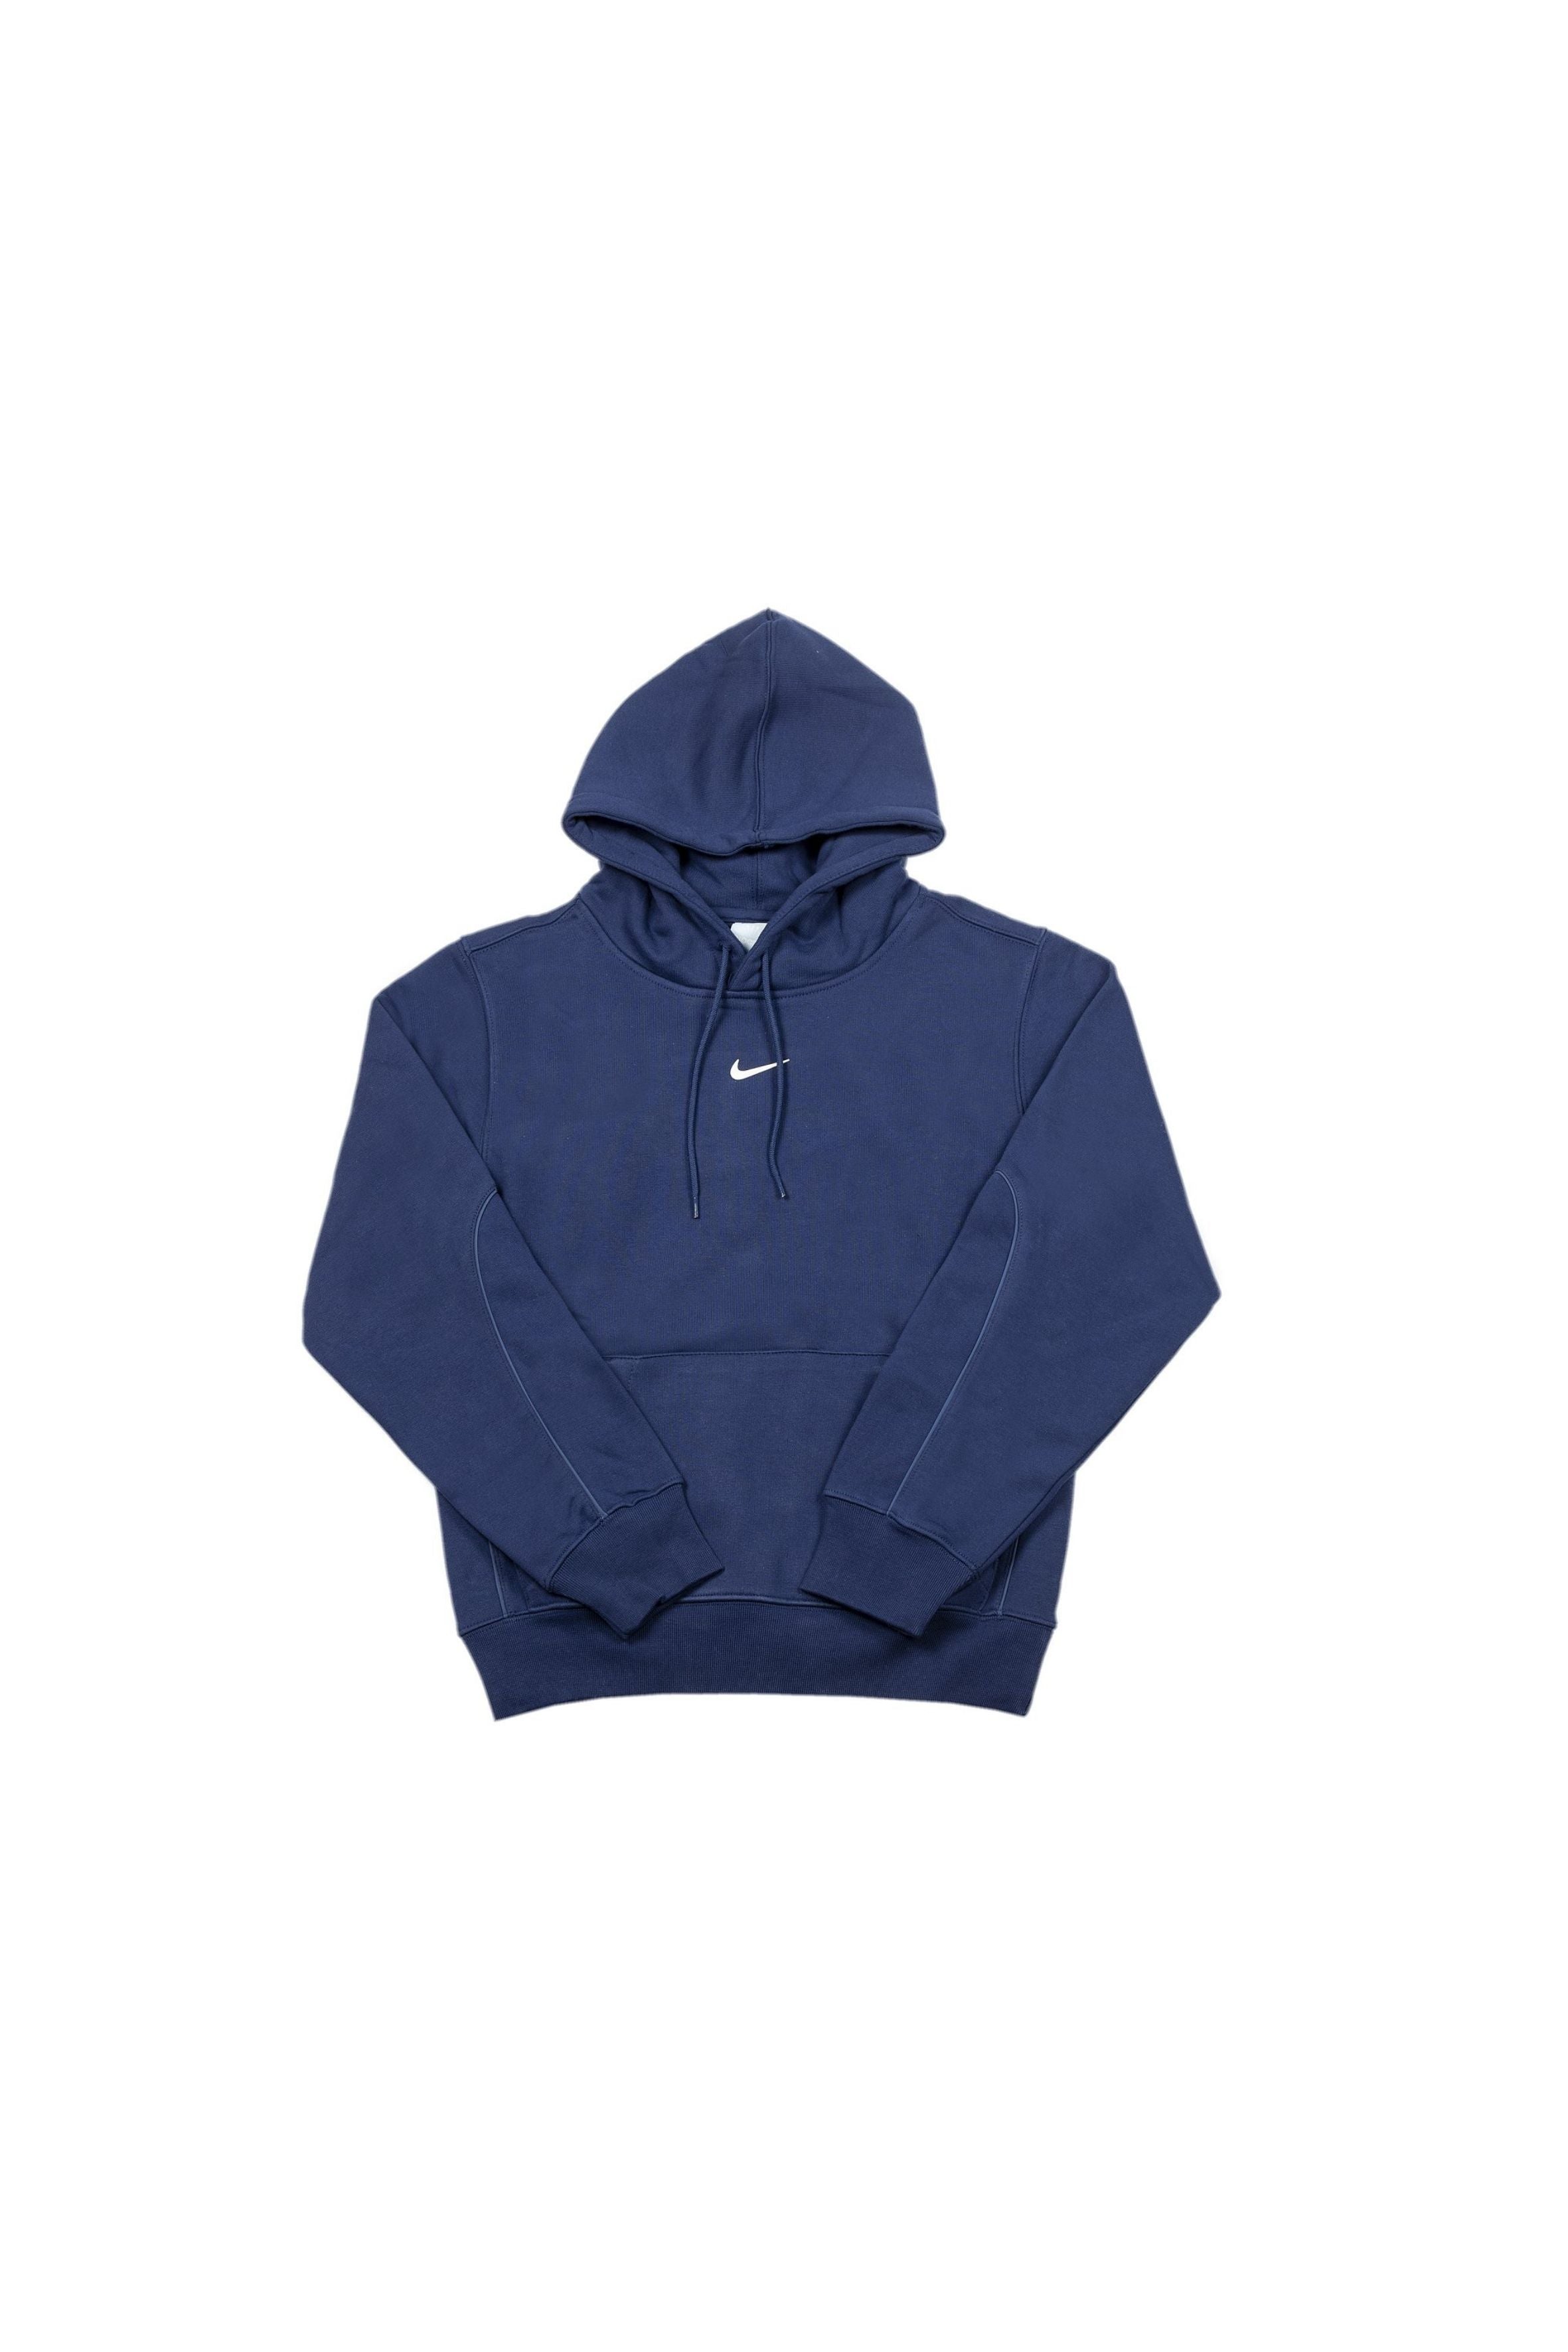 Nike x Drake NOCTA Hoodie Navy – Curated by Charbel